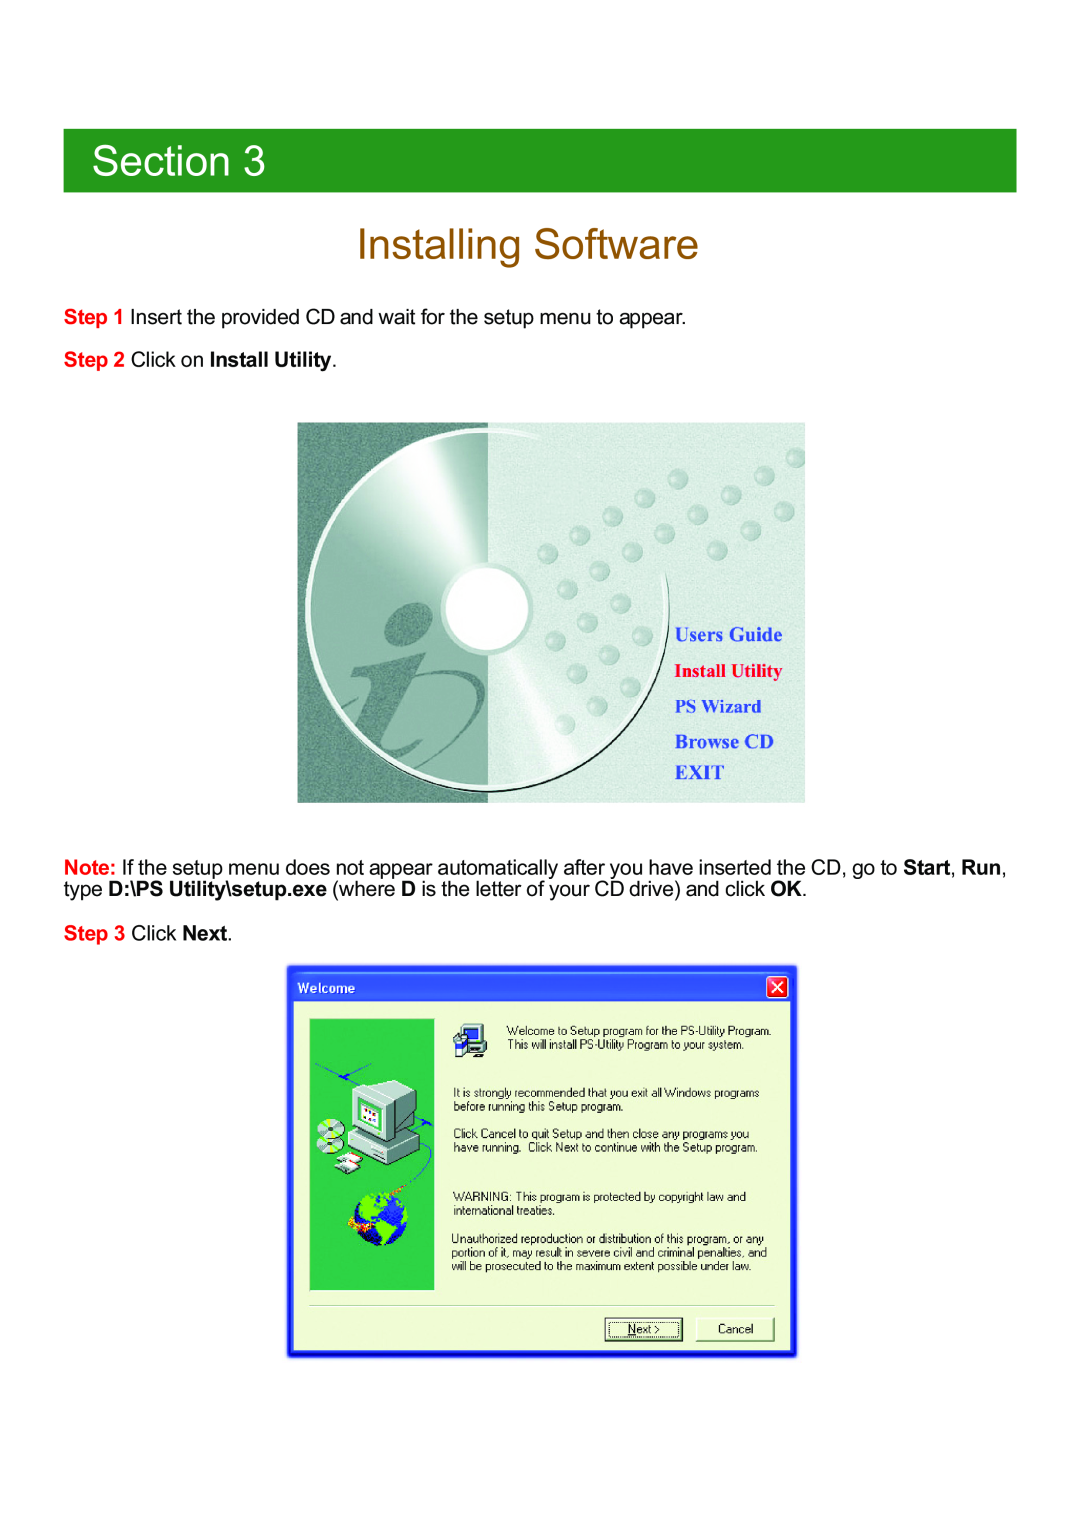 Airlink APSUSB201W Installing Software, Section, Insert the provided CD and wait for the setup menu to appear, Click Next 